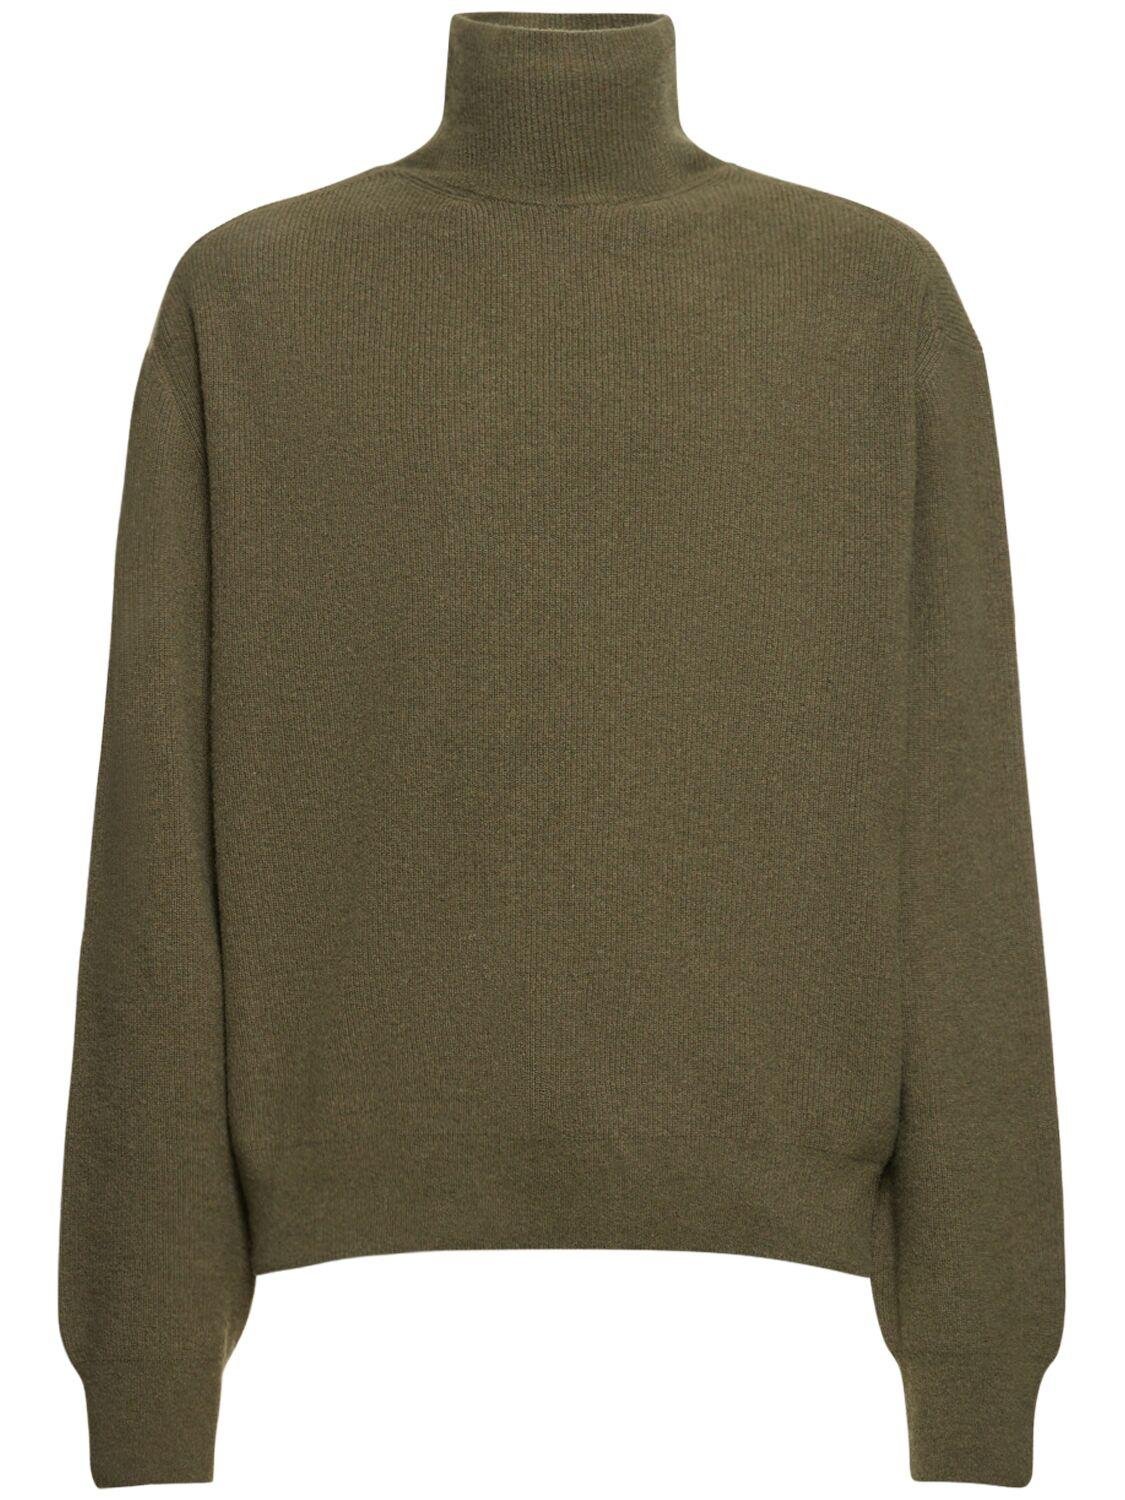 Wool Blend Knit Turtleneck by LEMAIRE